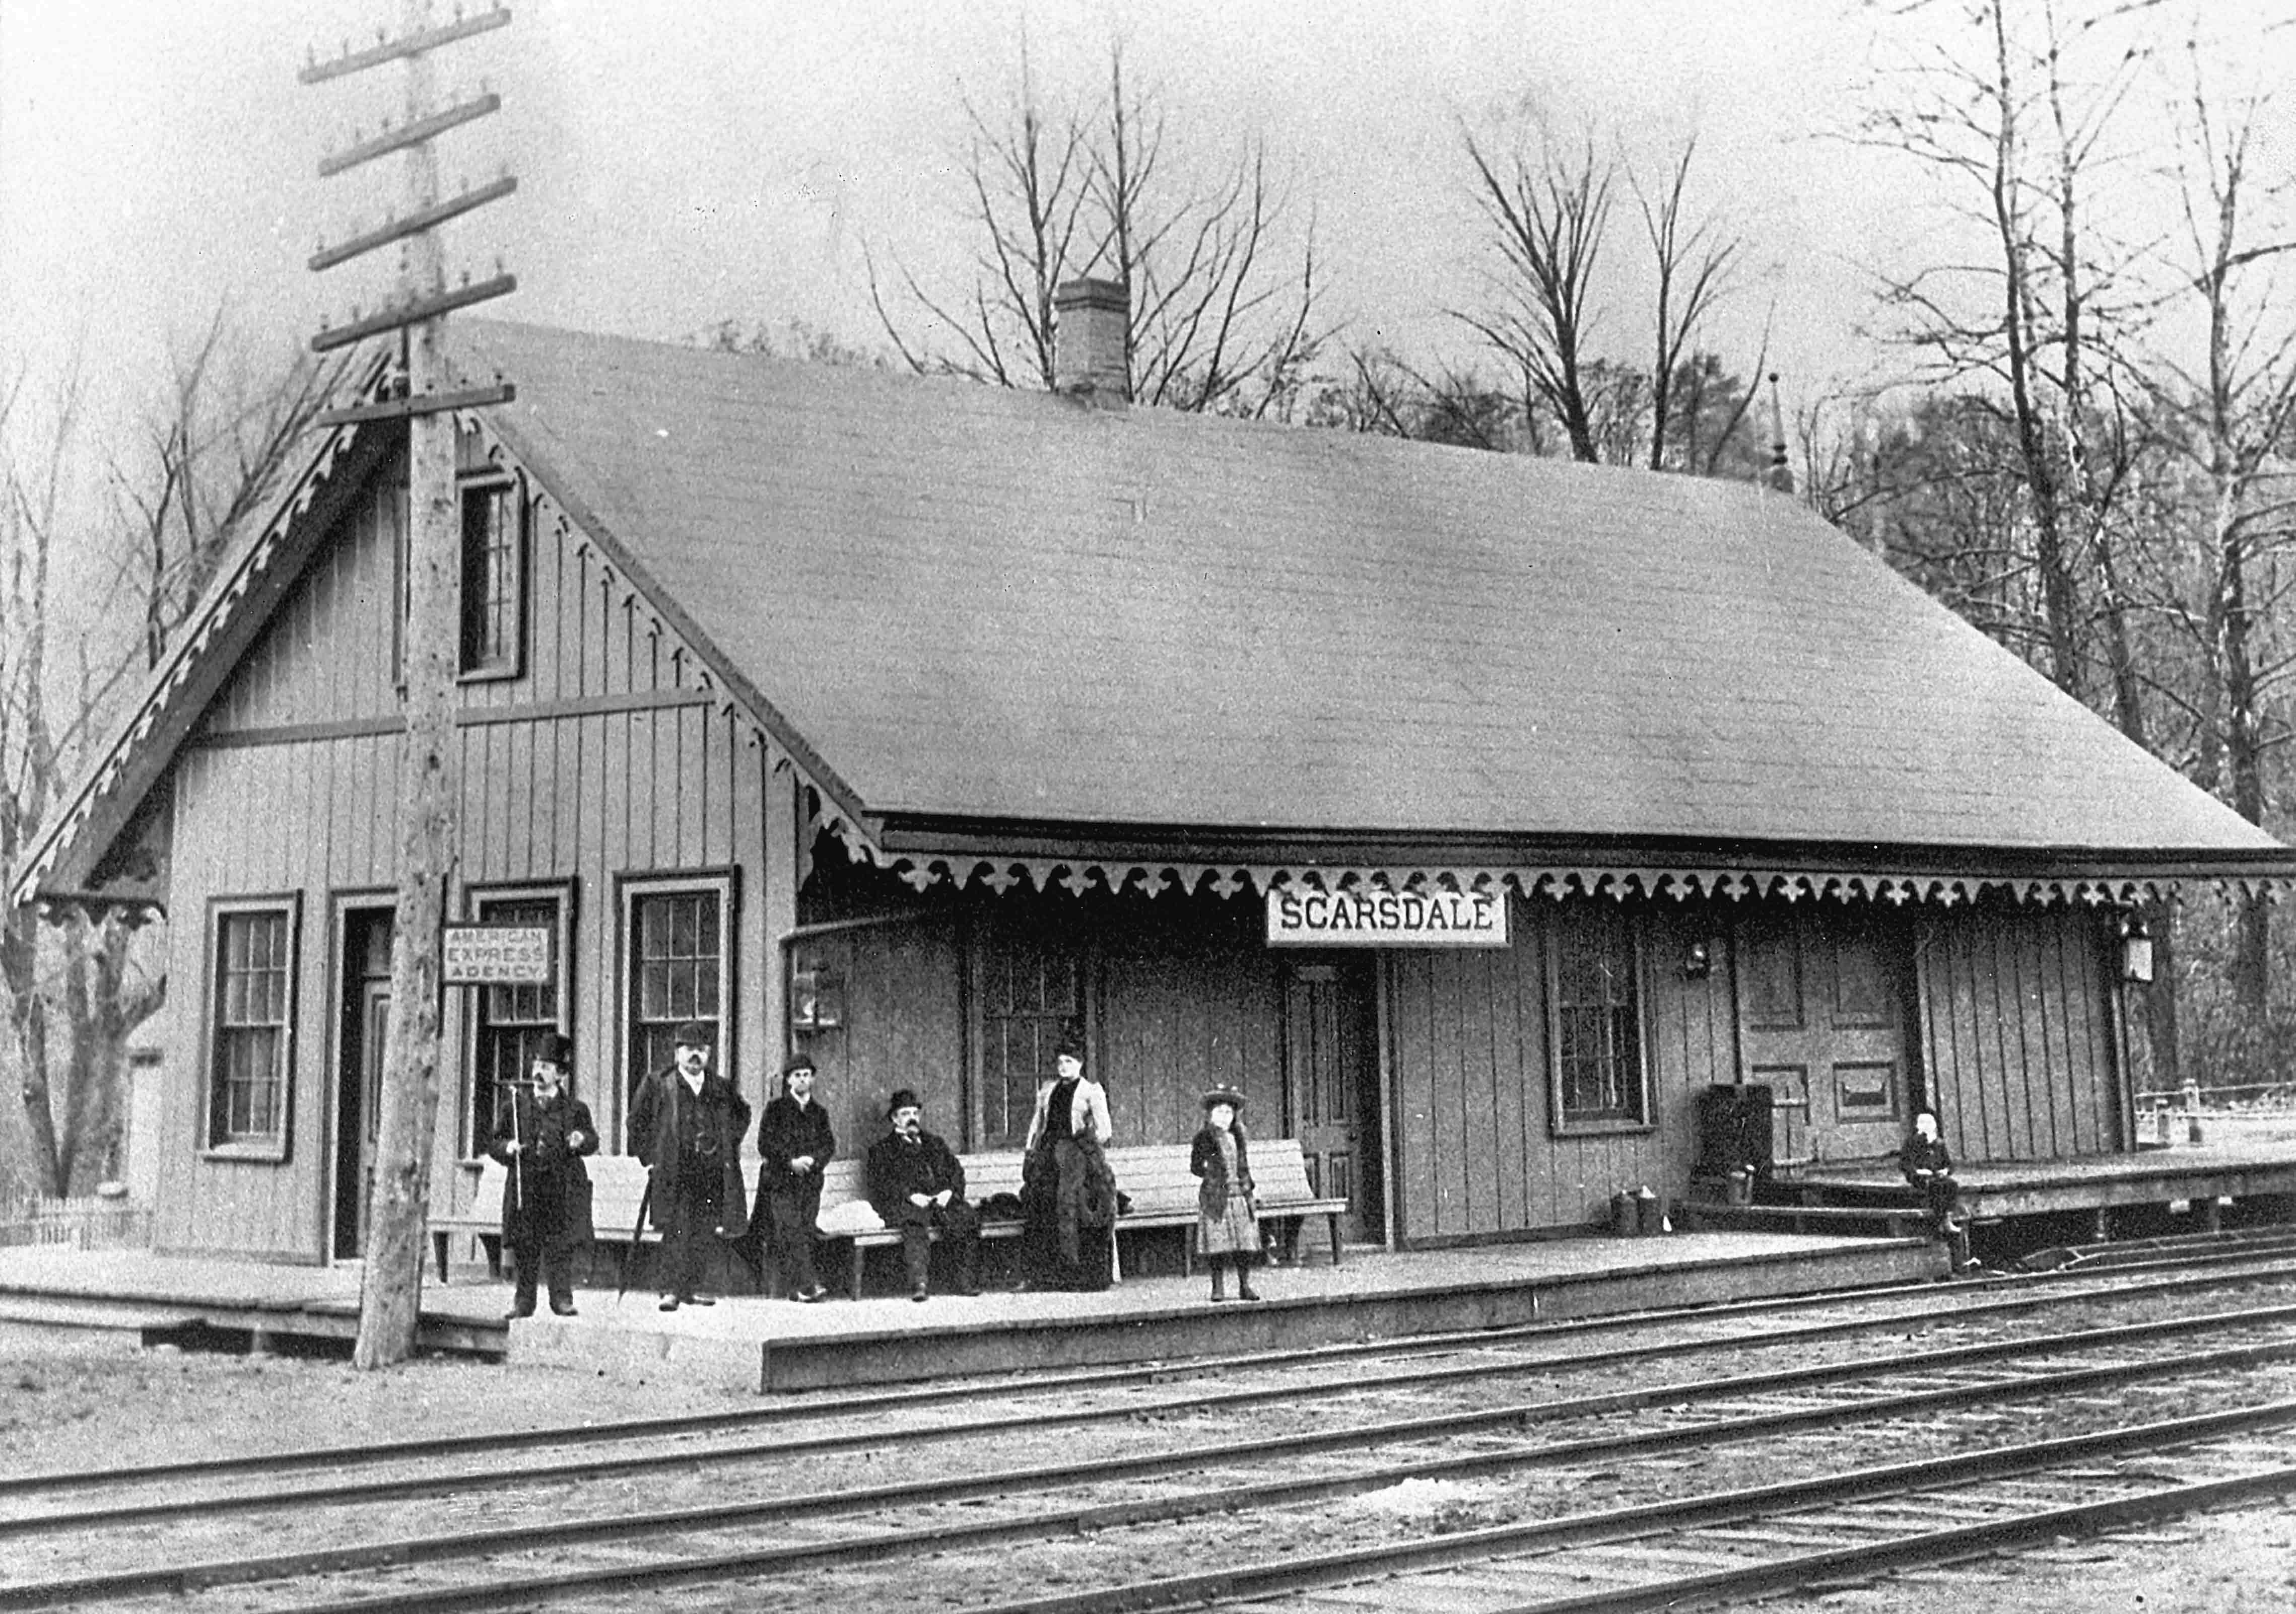 The present Scarsdale Railroad Station replaced this structure in 1902.